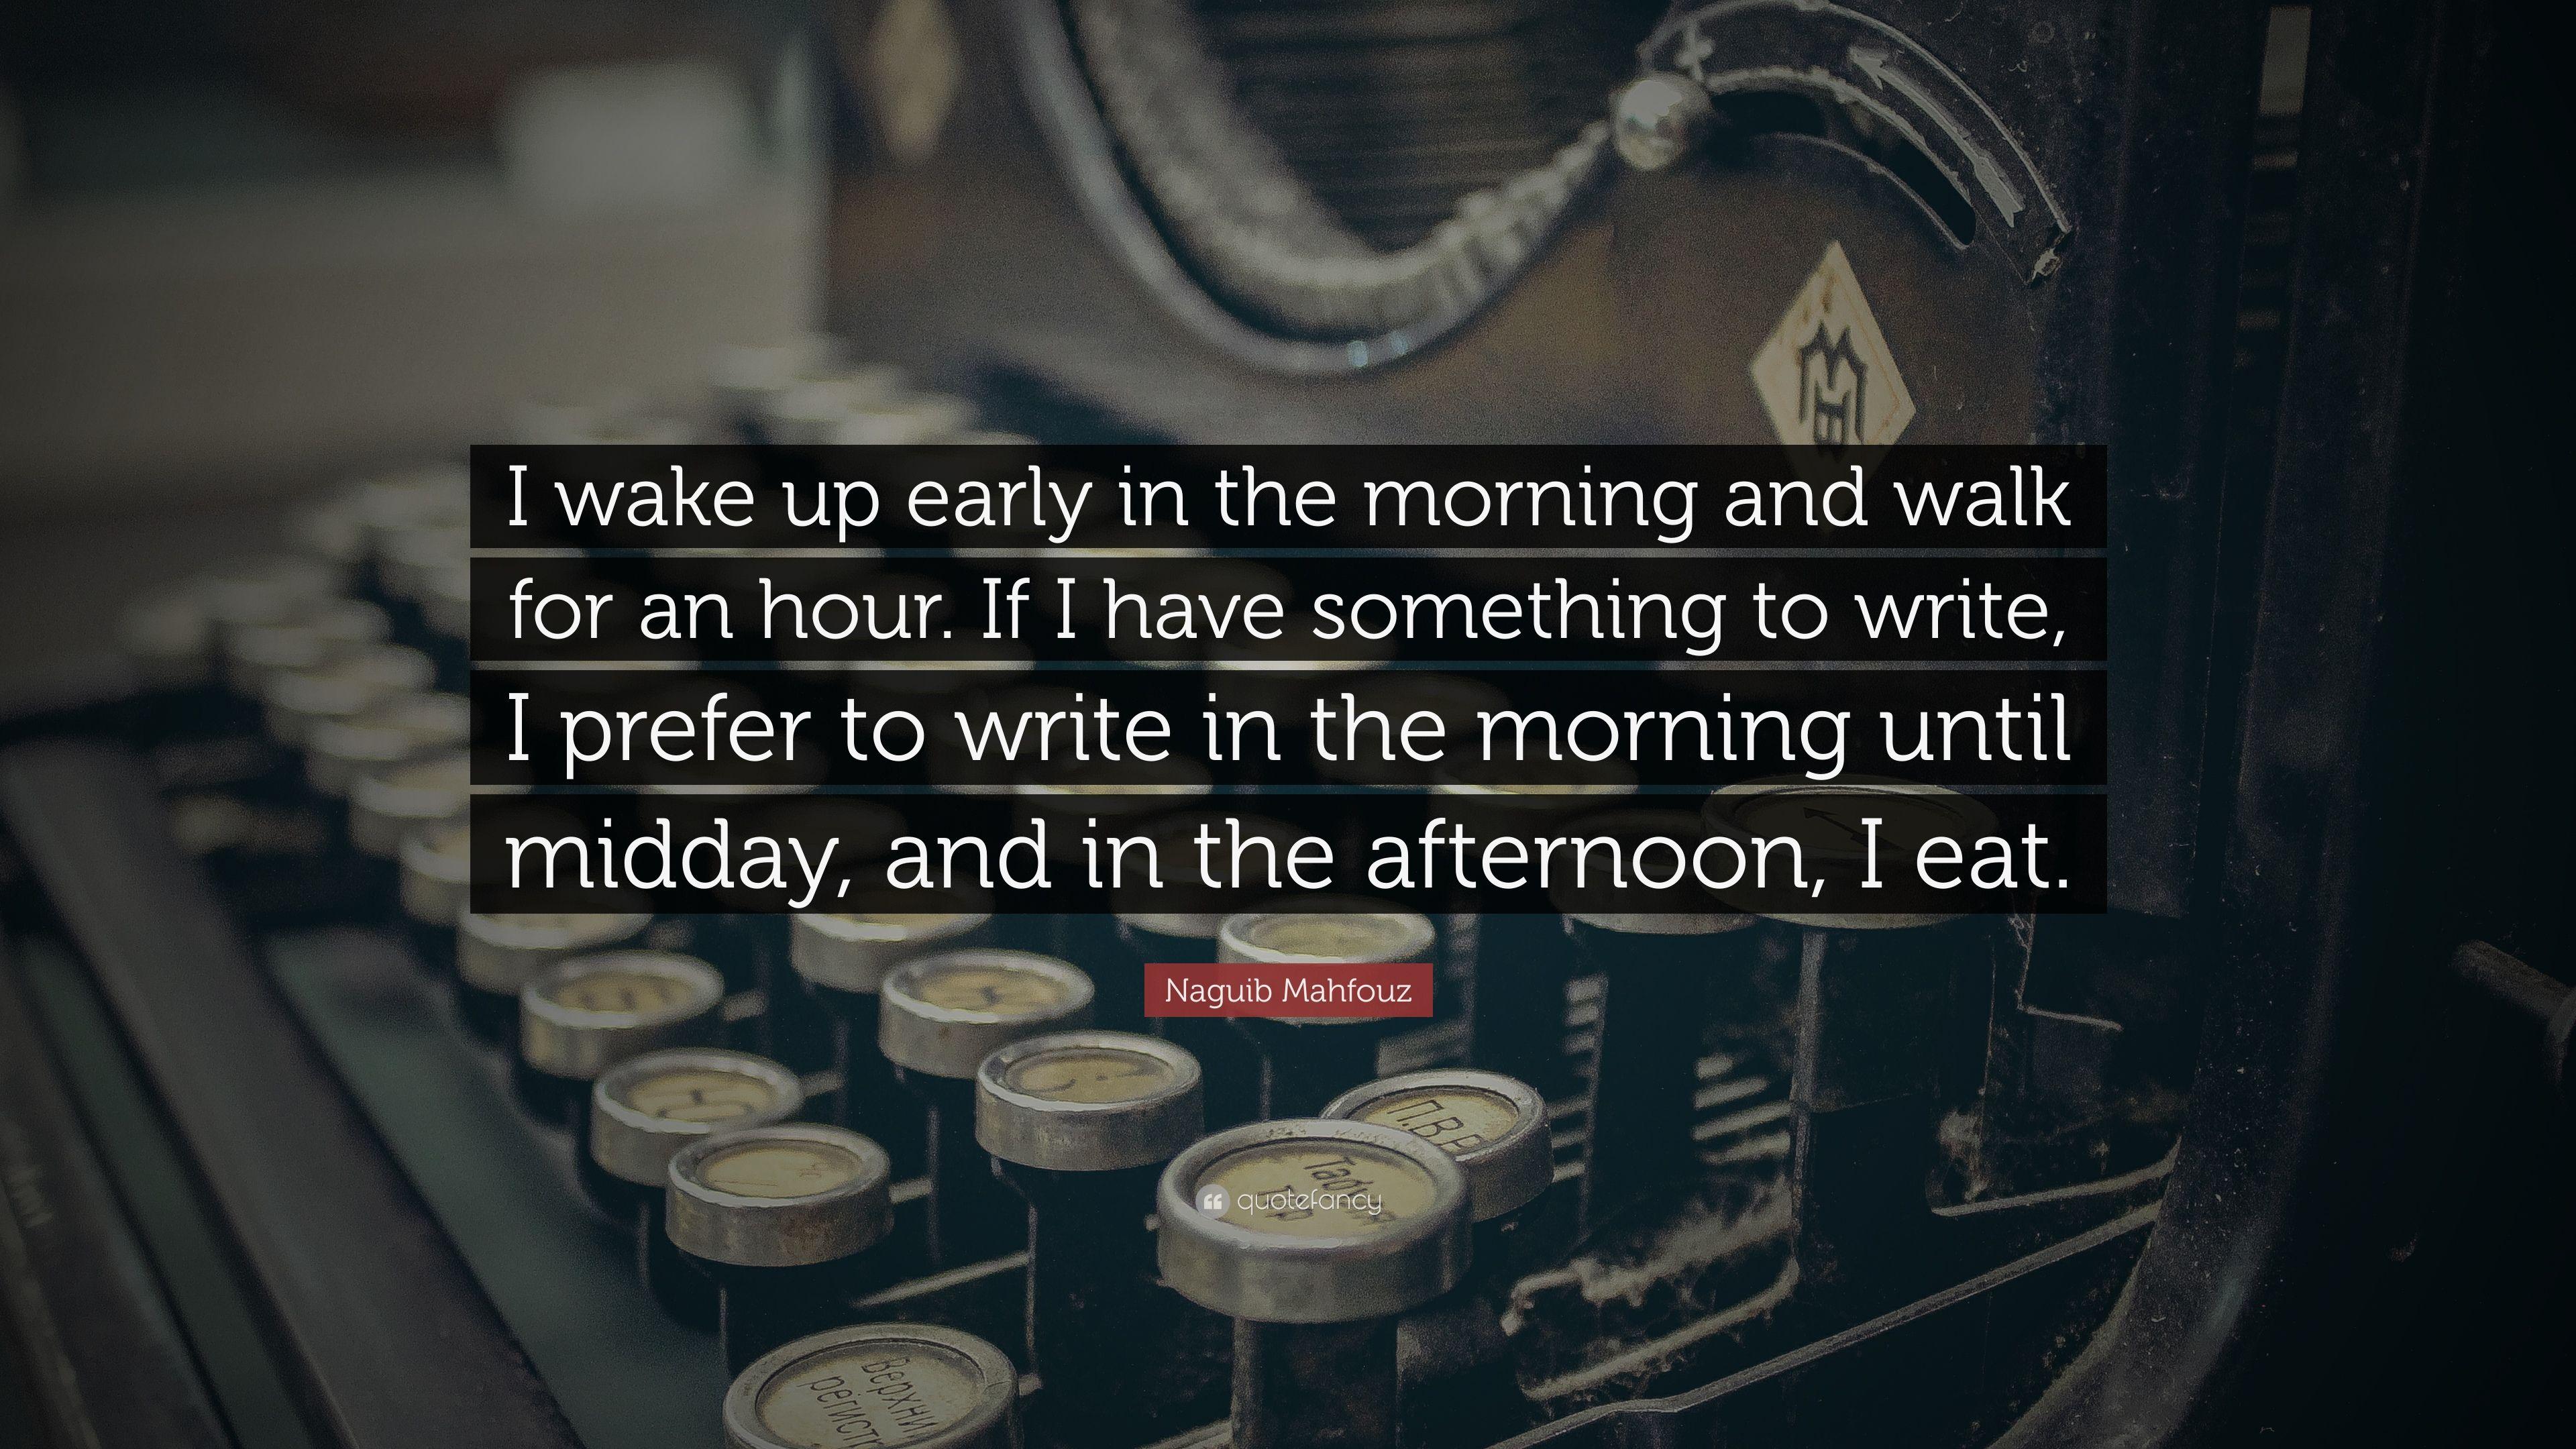 Naguib Mahfouz Quote: “I wake up early in the morning and walk